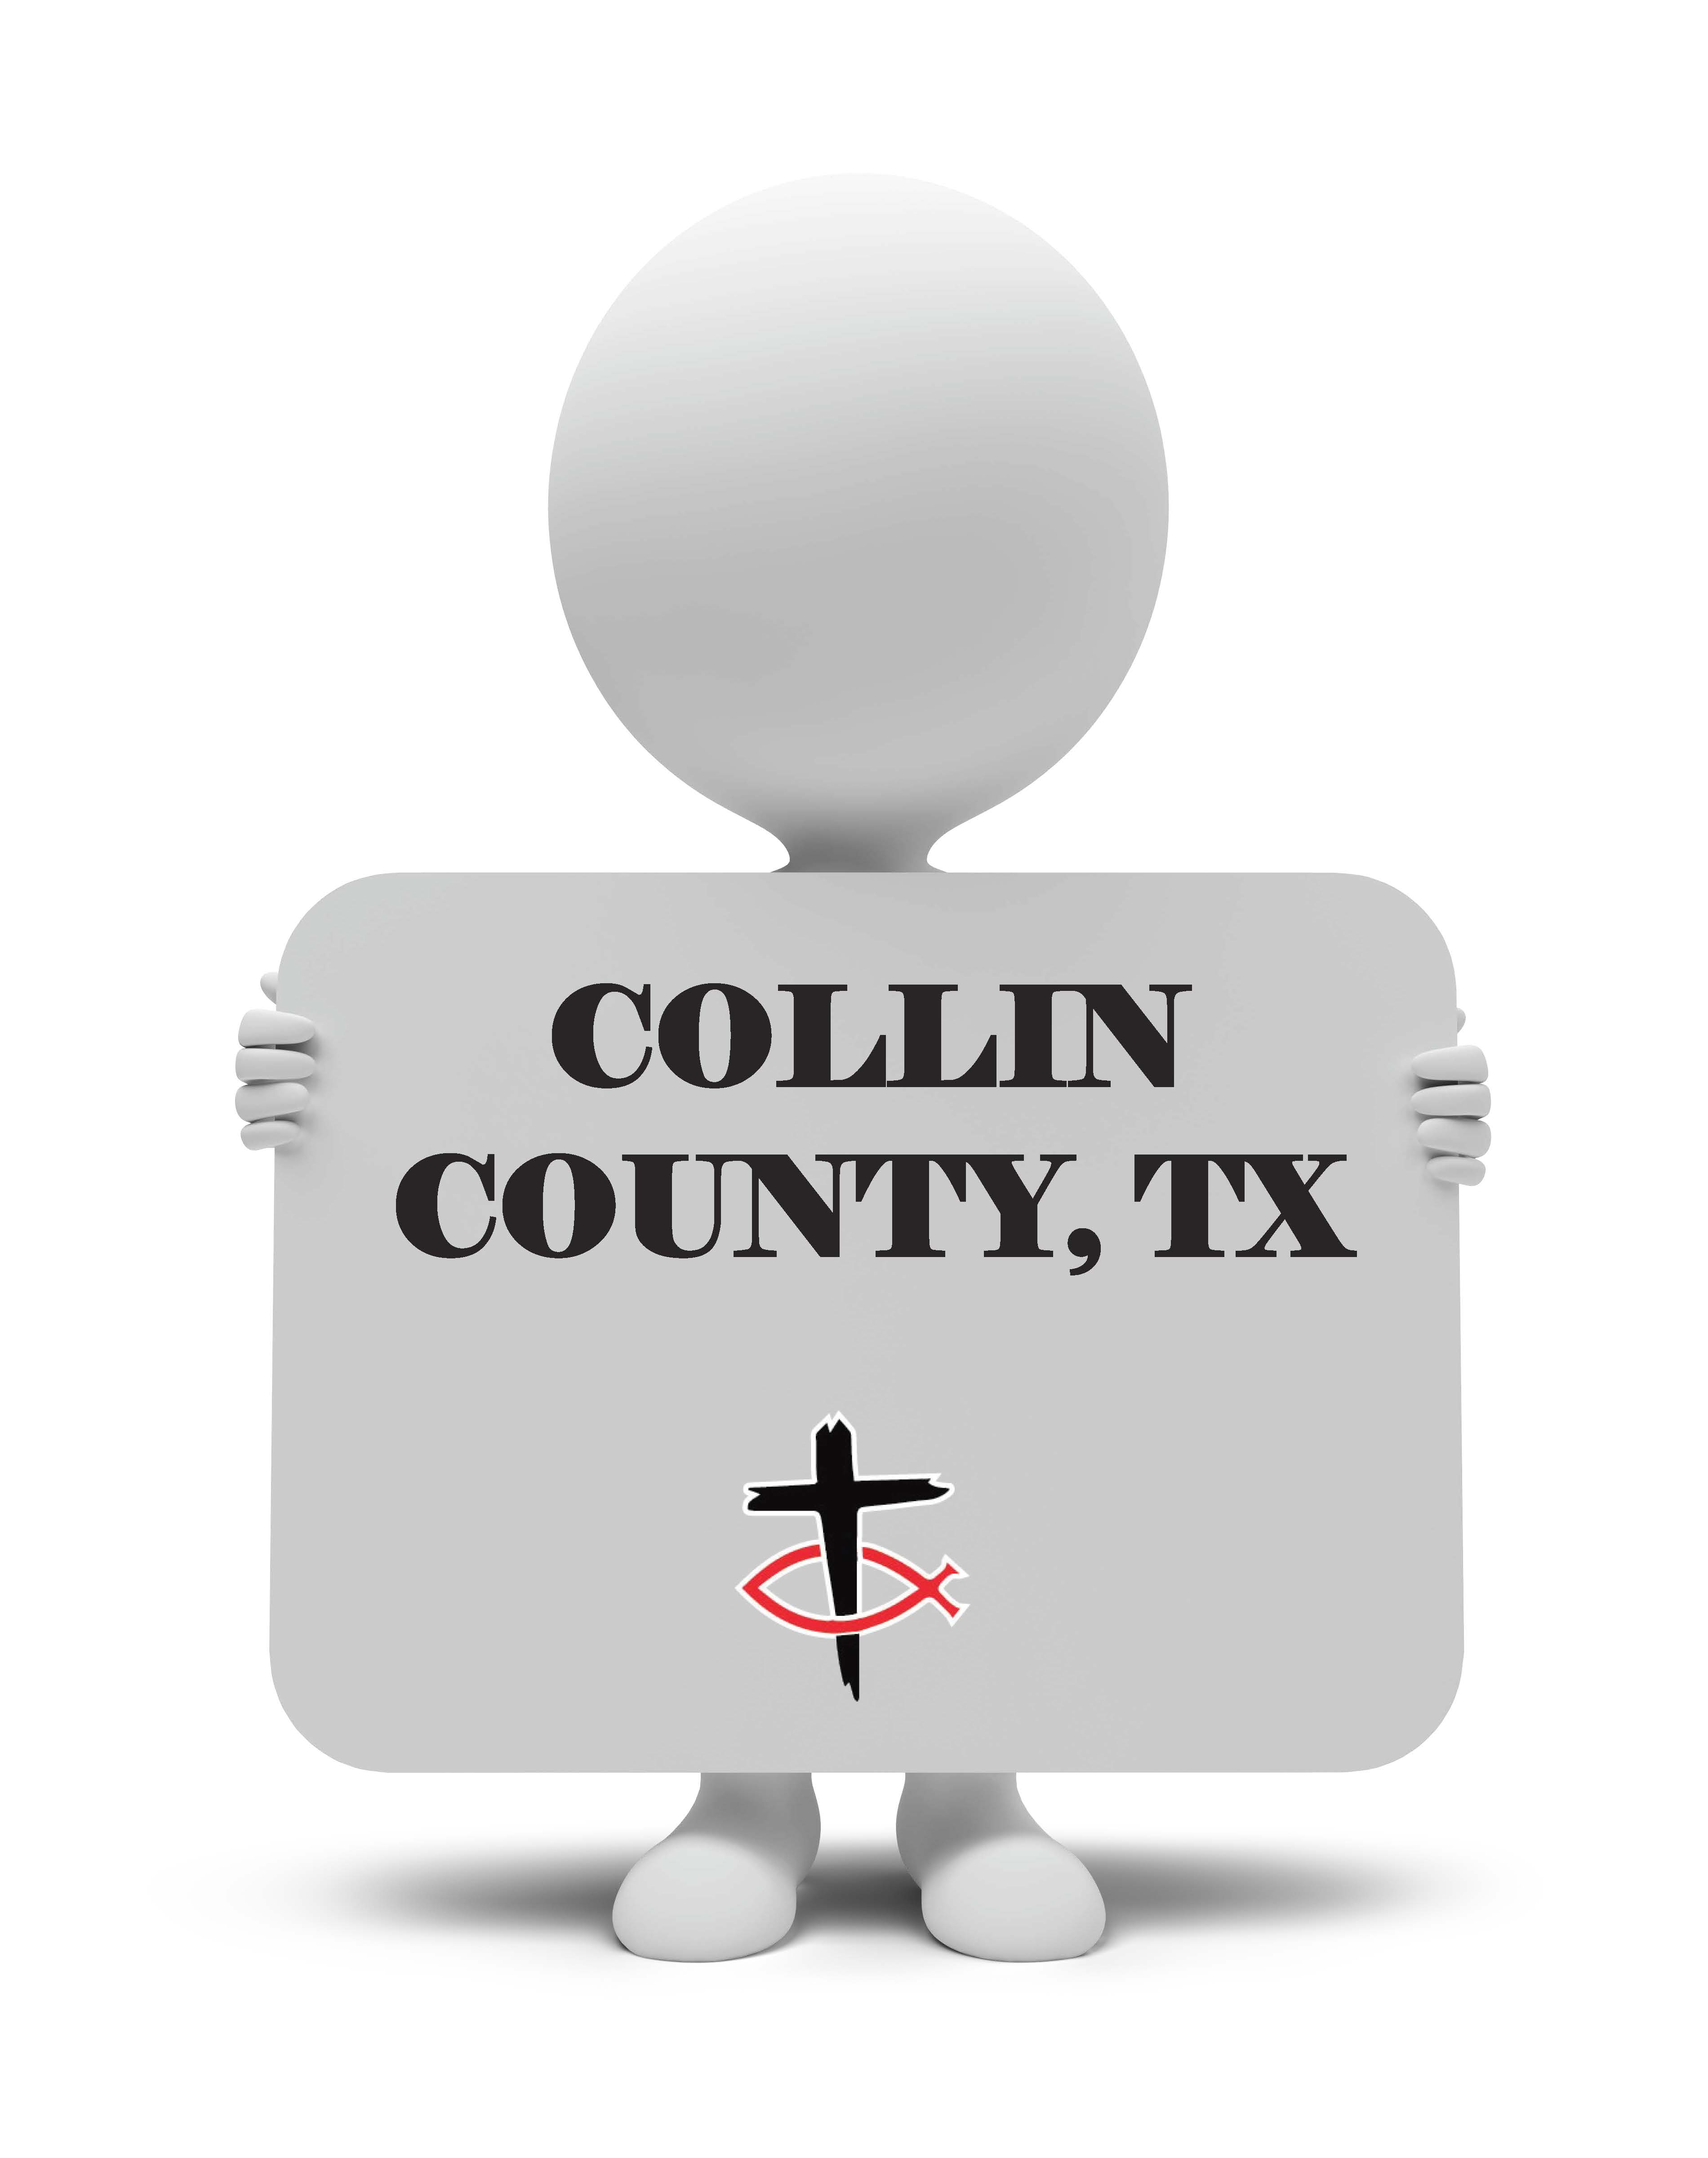 pick up the christian business print guide in collin county tx